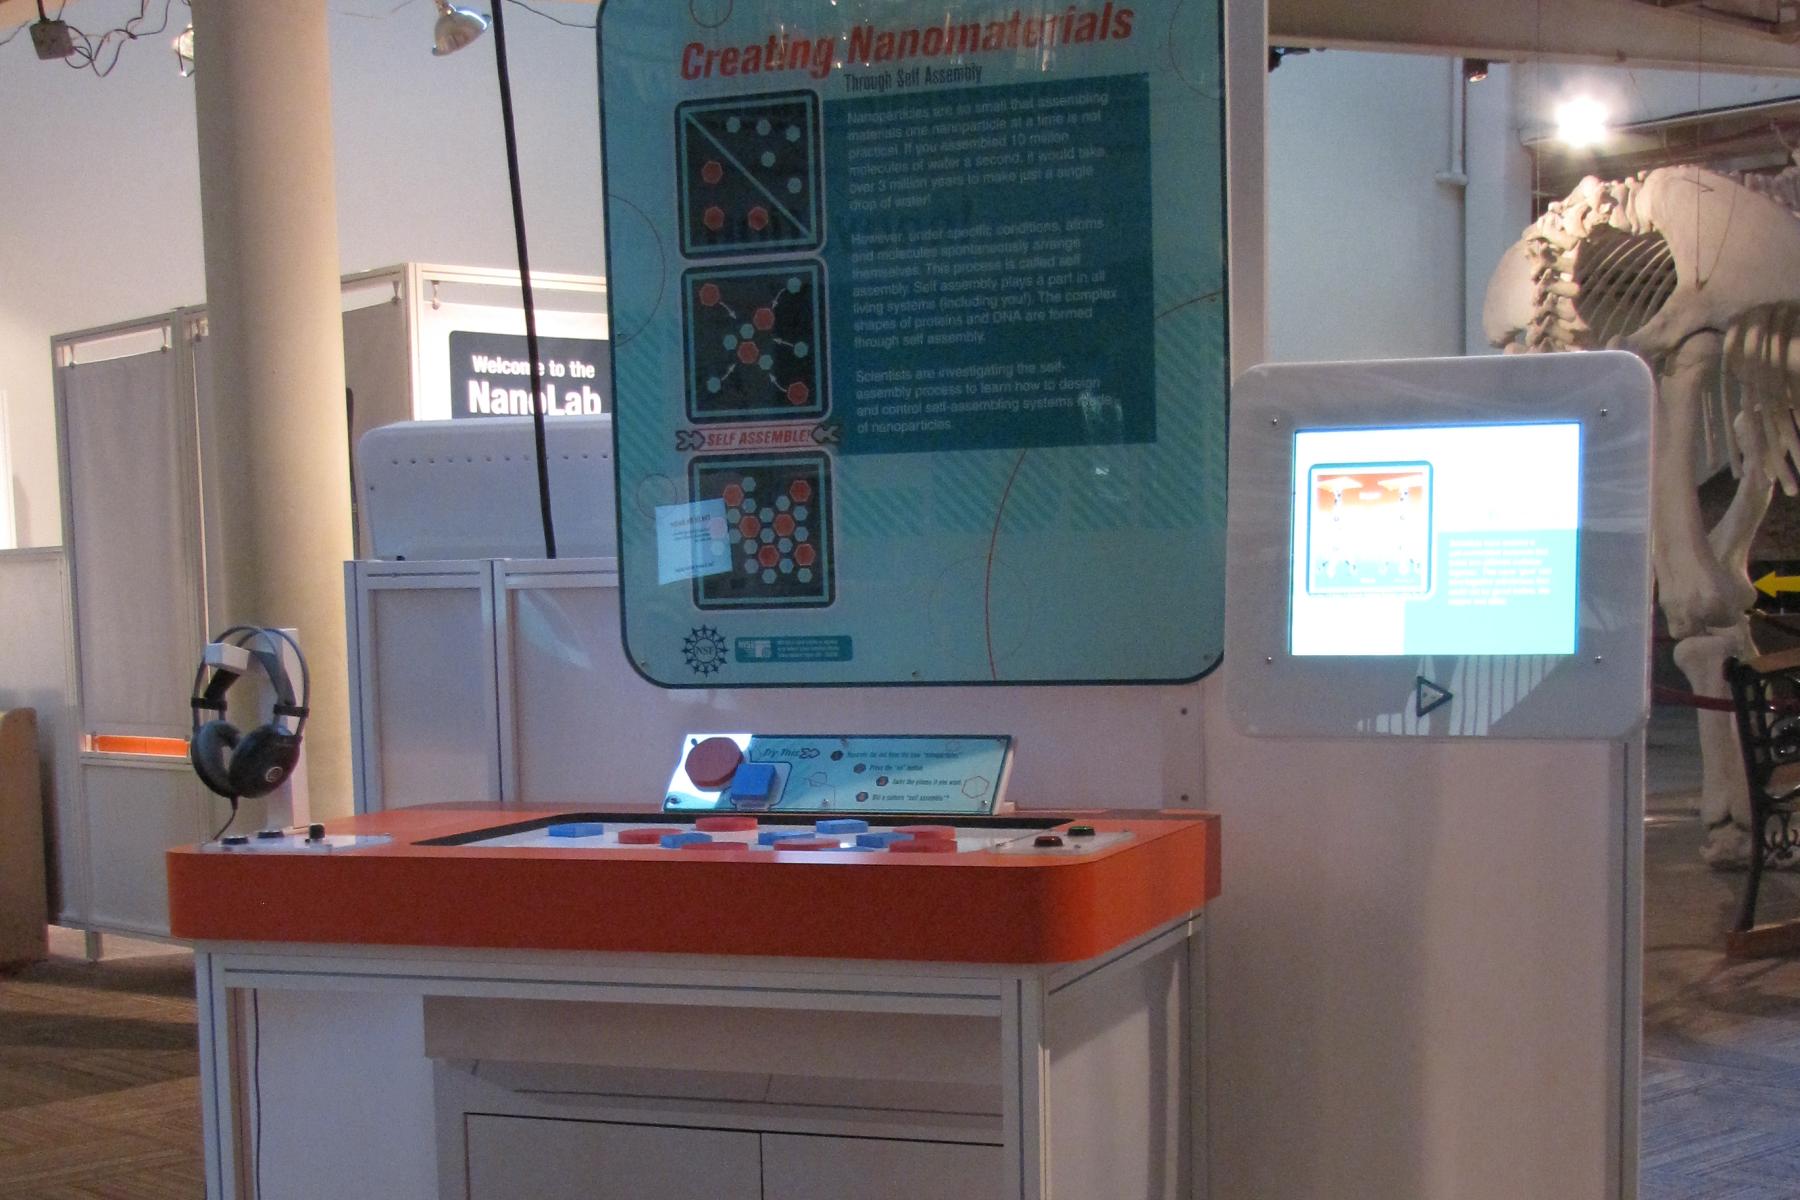 Creating Nanomaterials exhibit as viewed from the right with a stool placed in front of it.